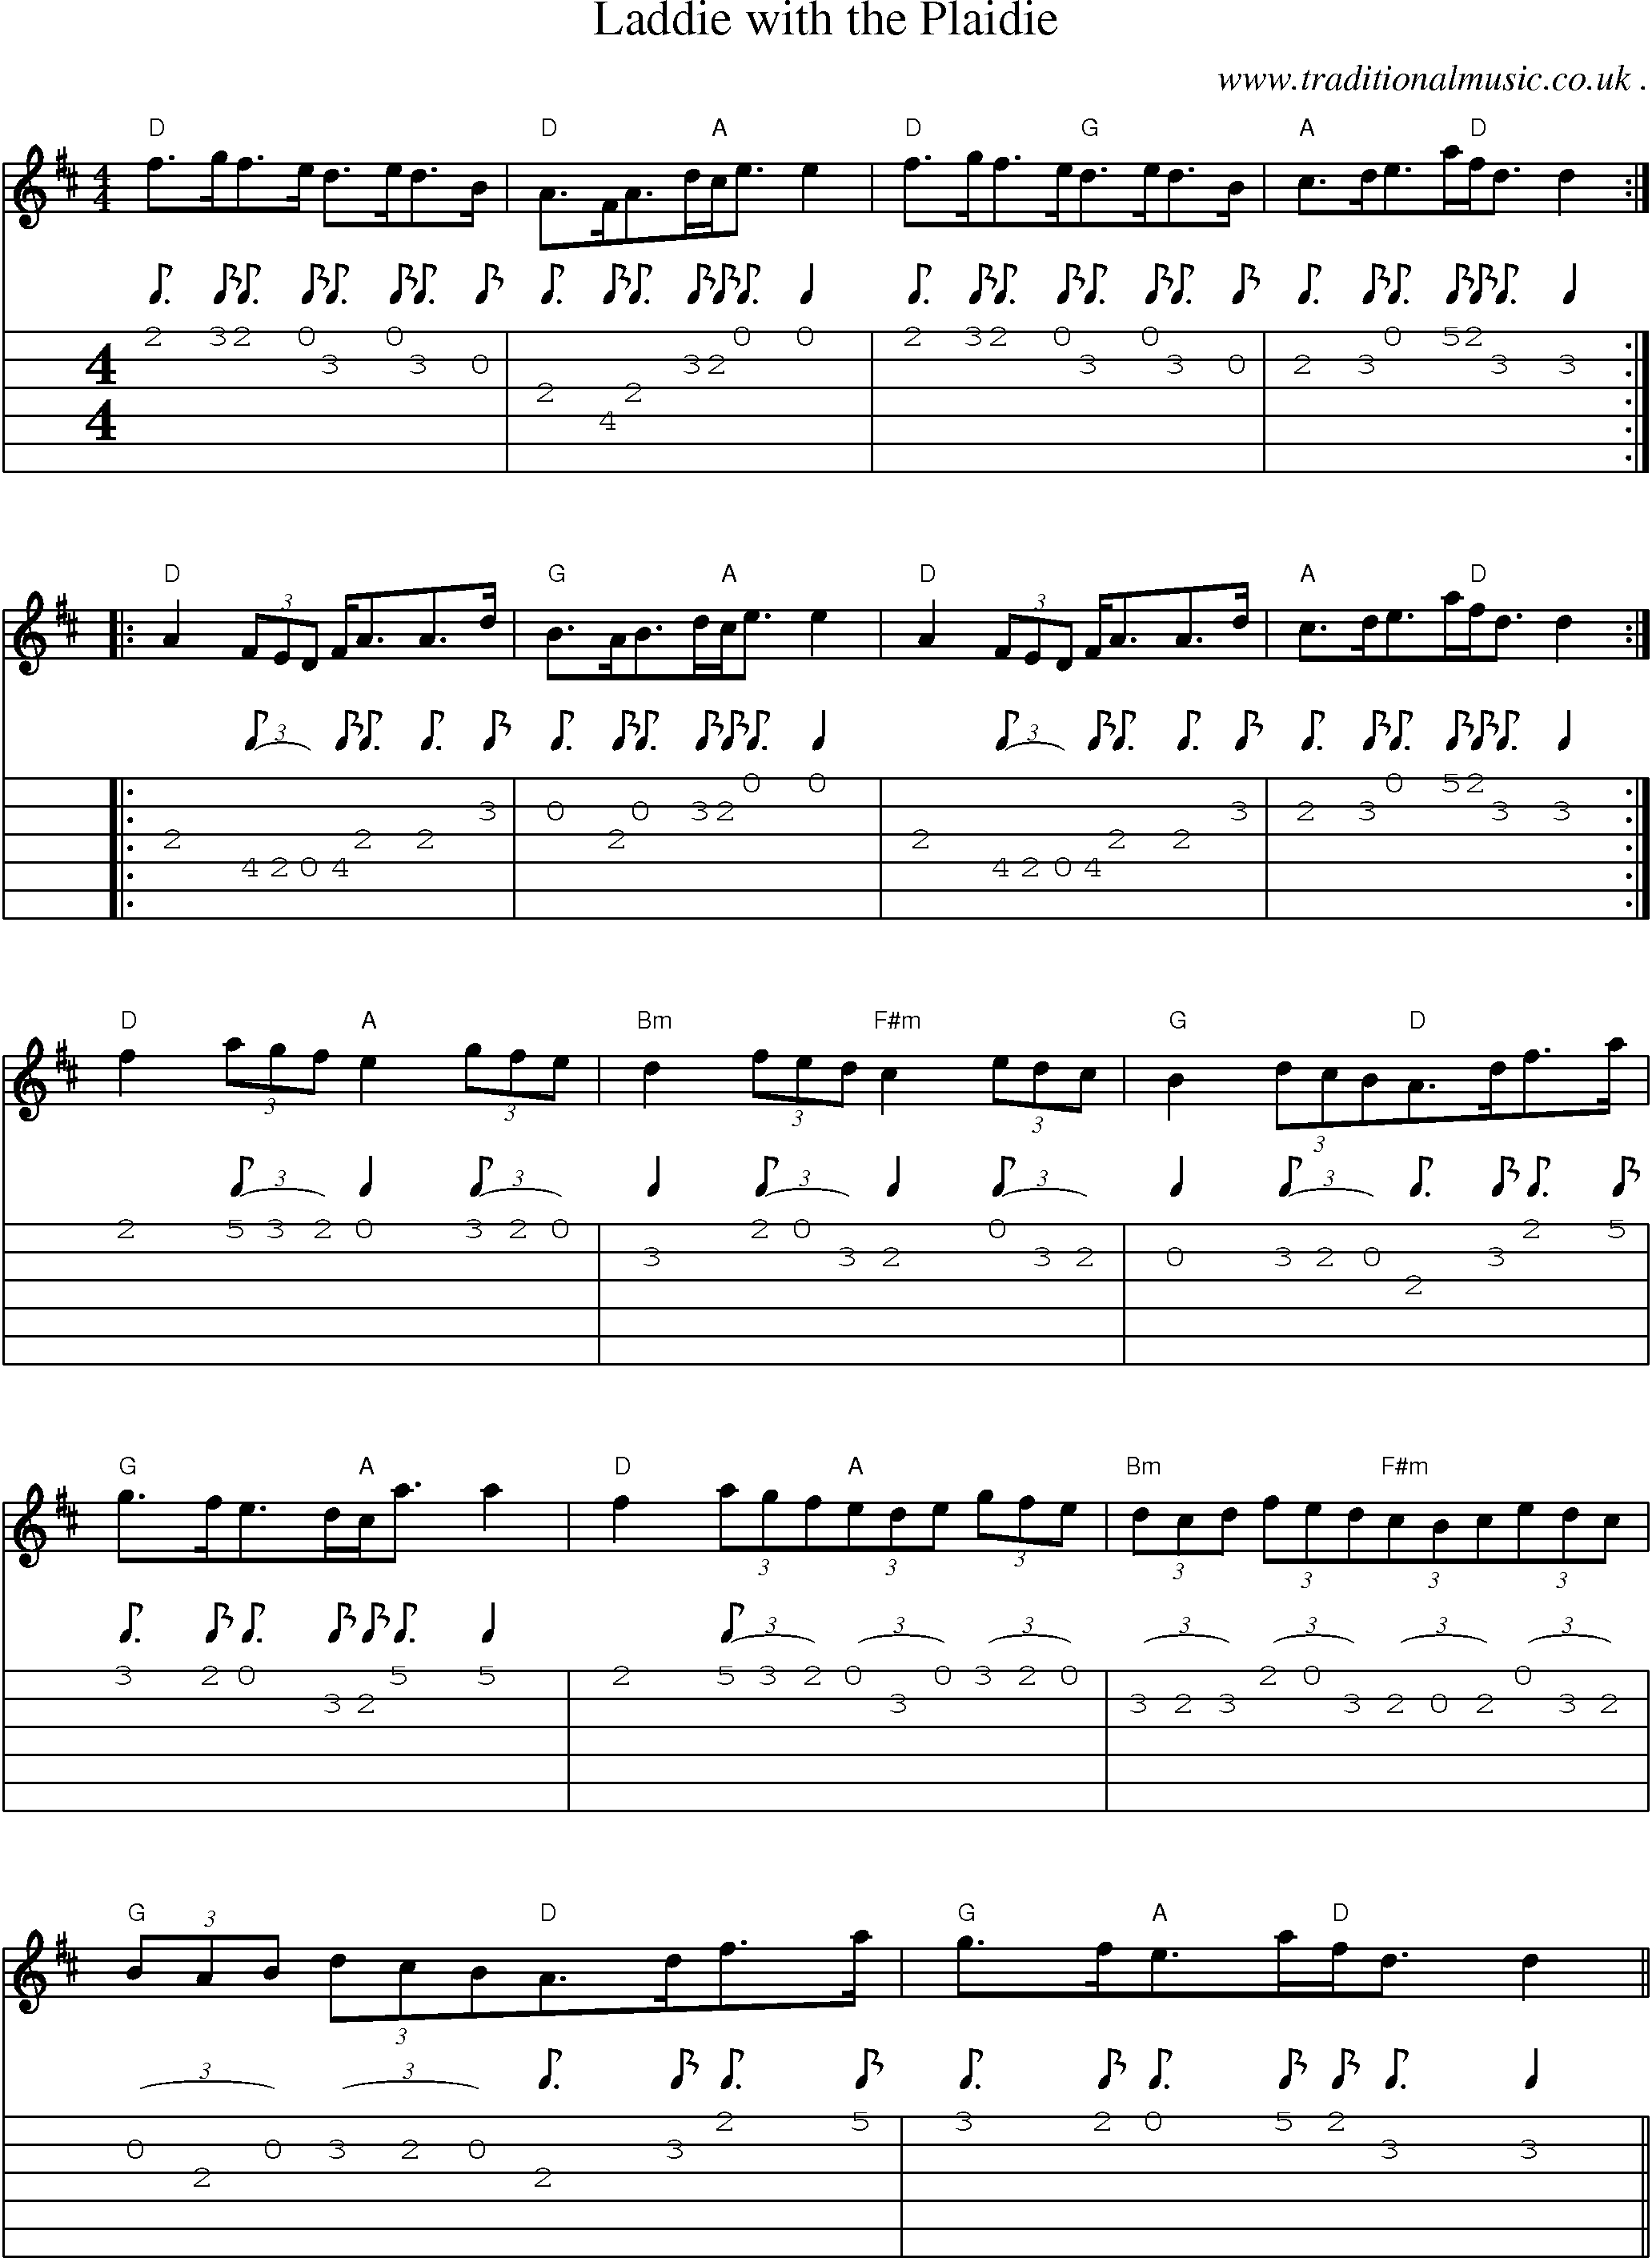 Sheet-Music and Guitar Tabs for Laddie With The Plaidie